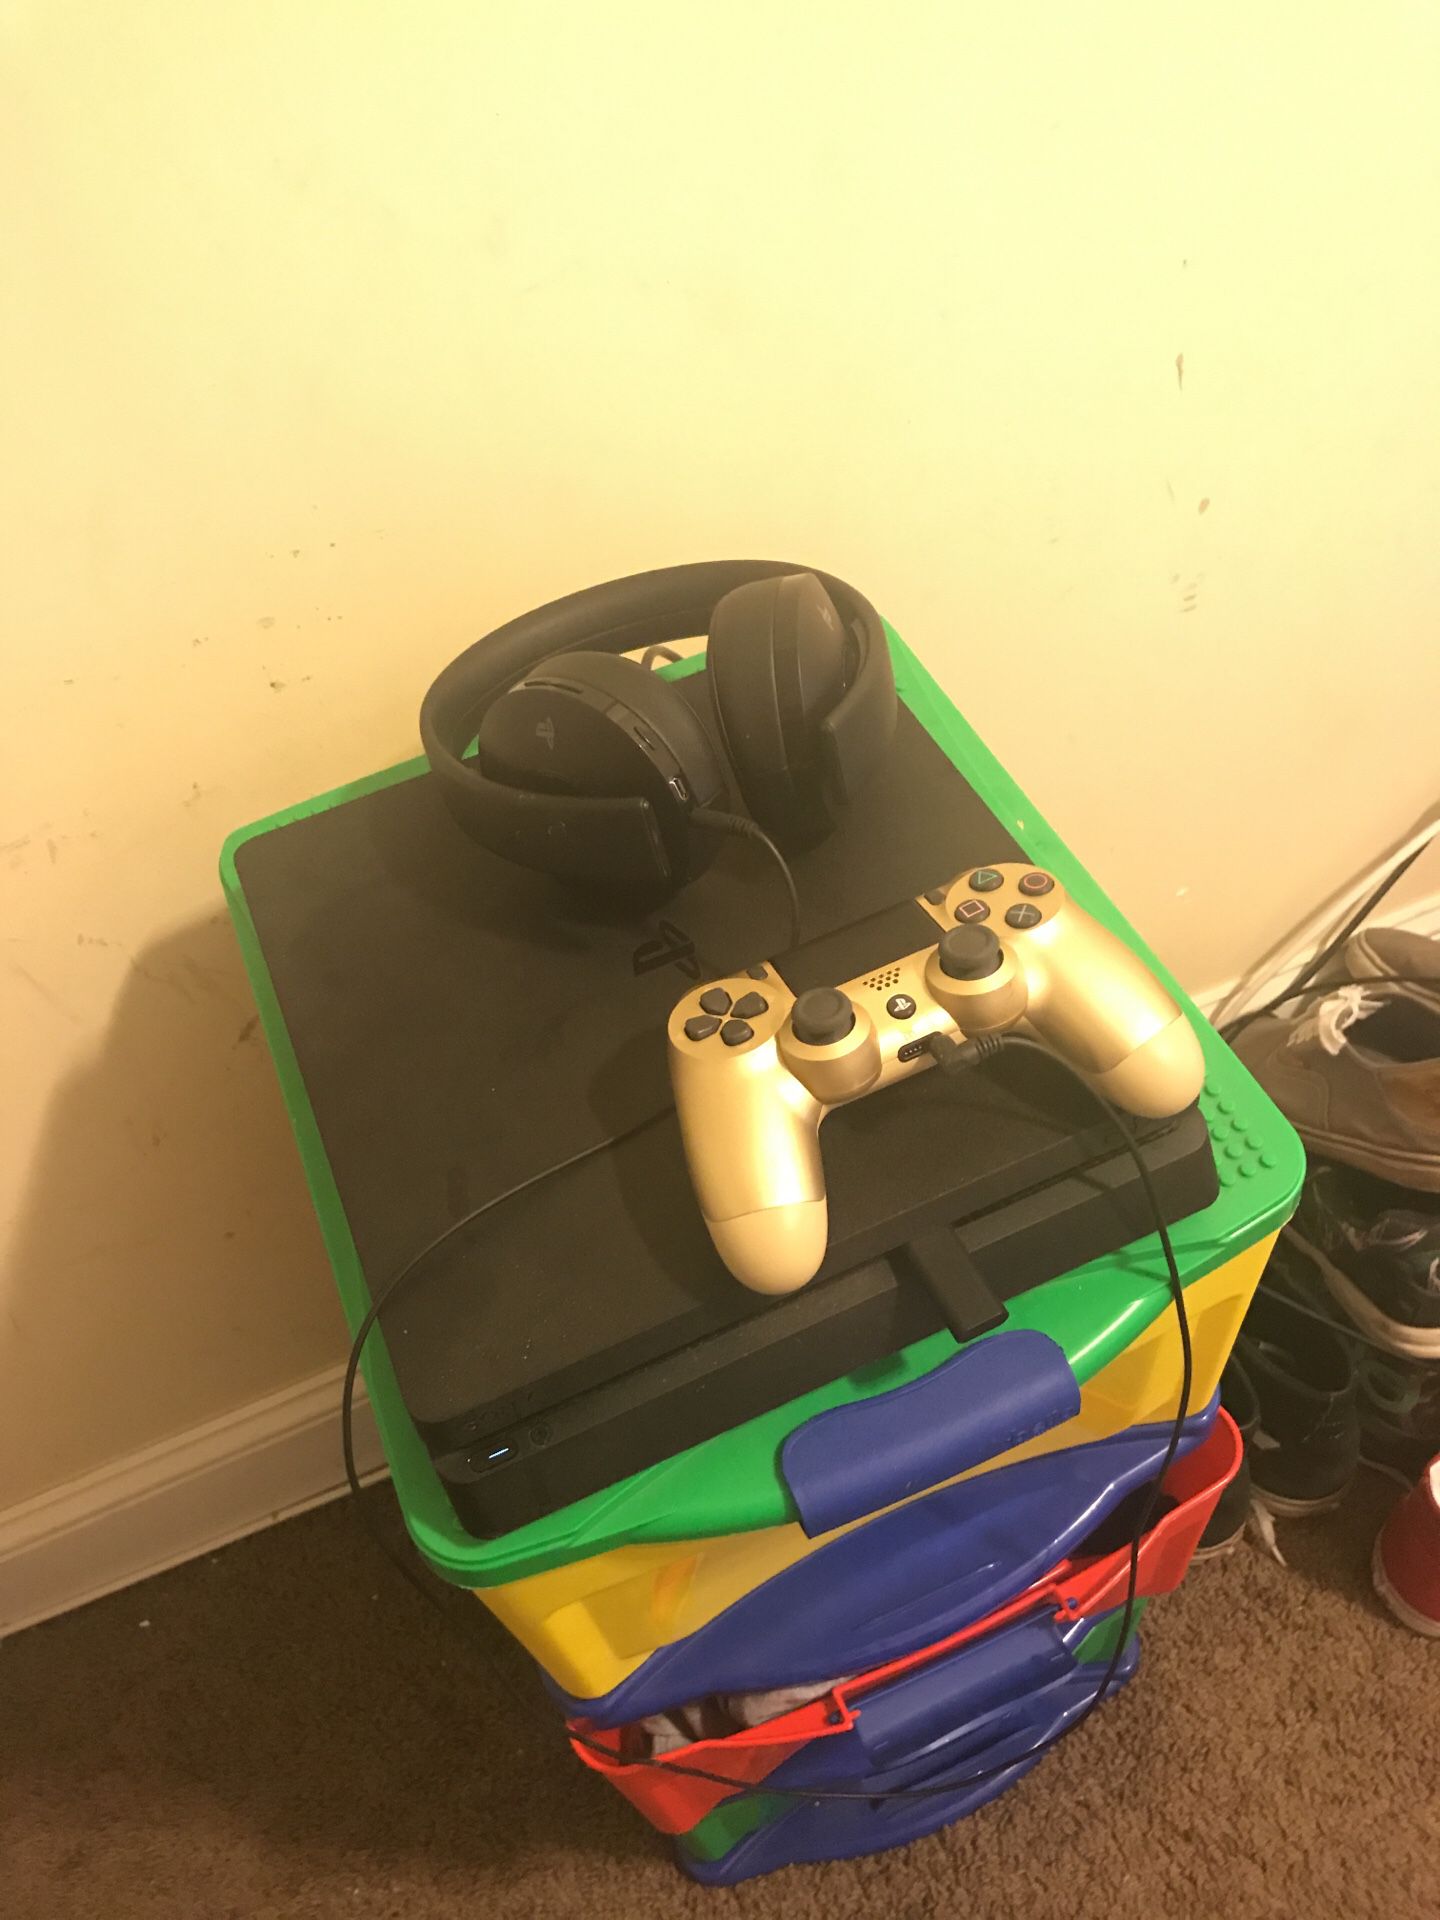 Selling my PS4 pro